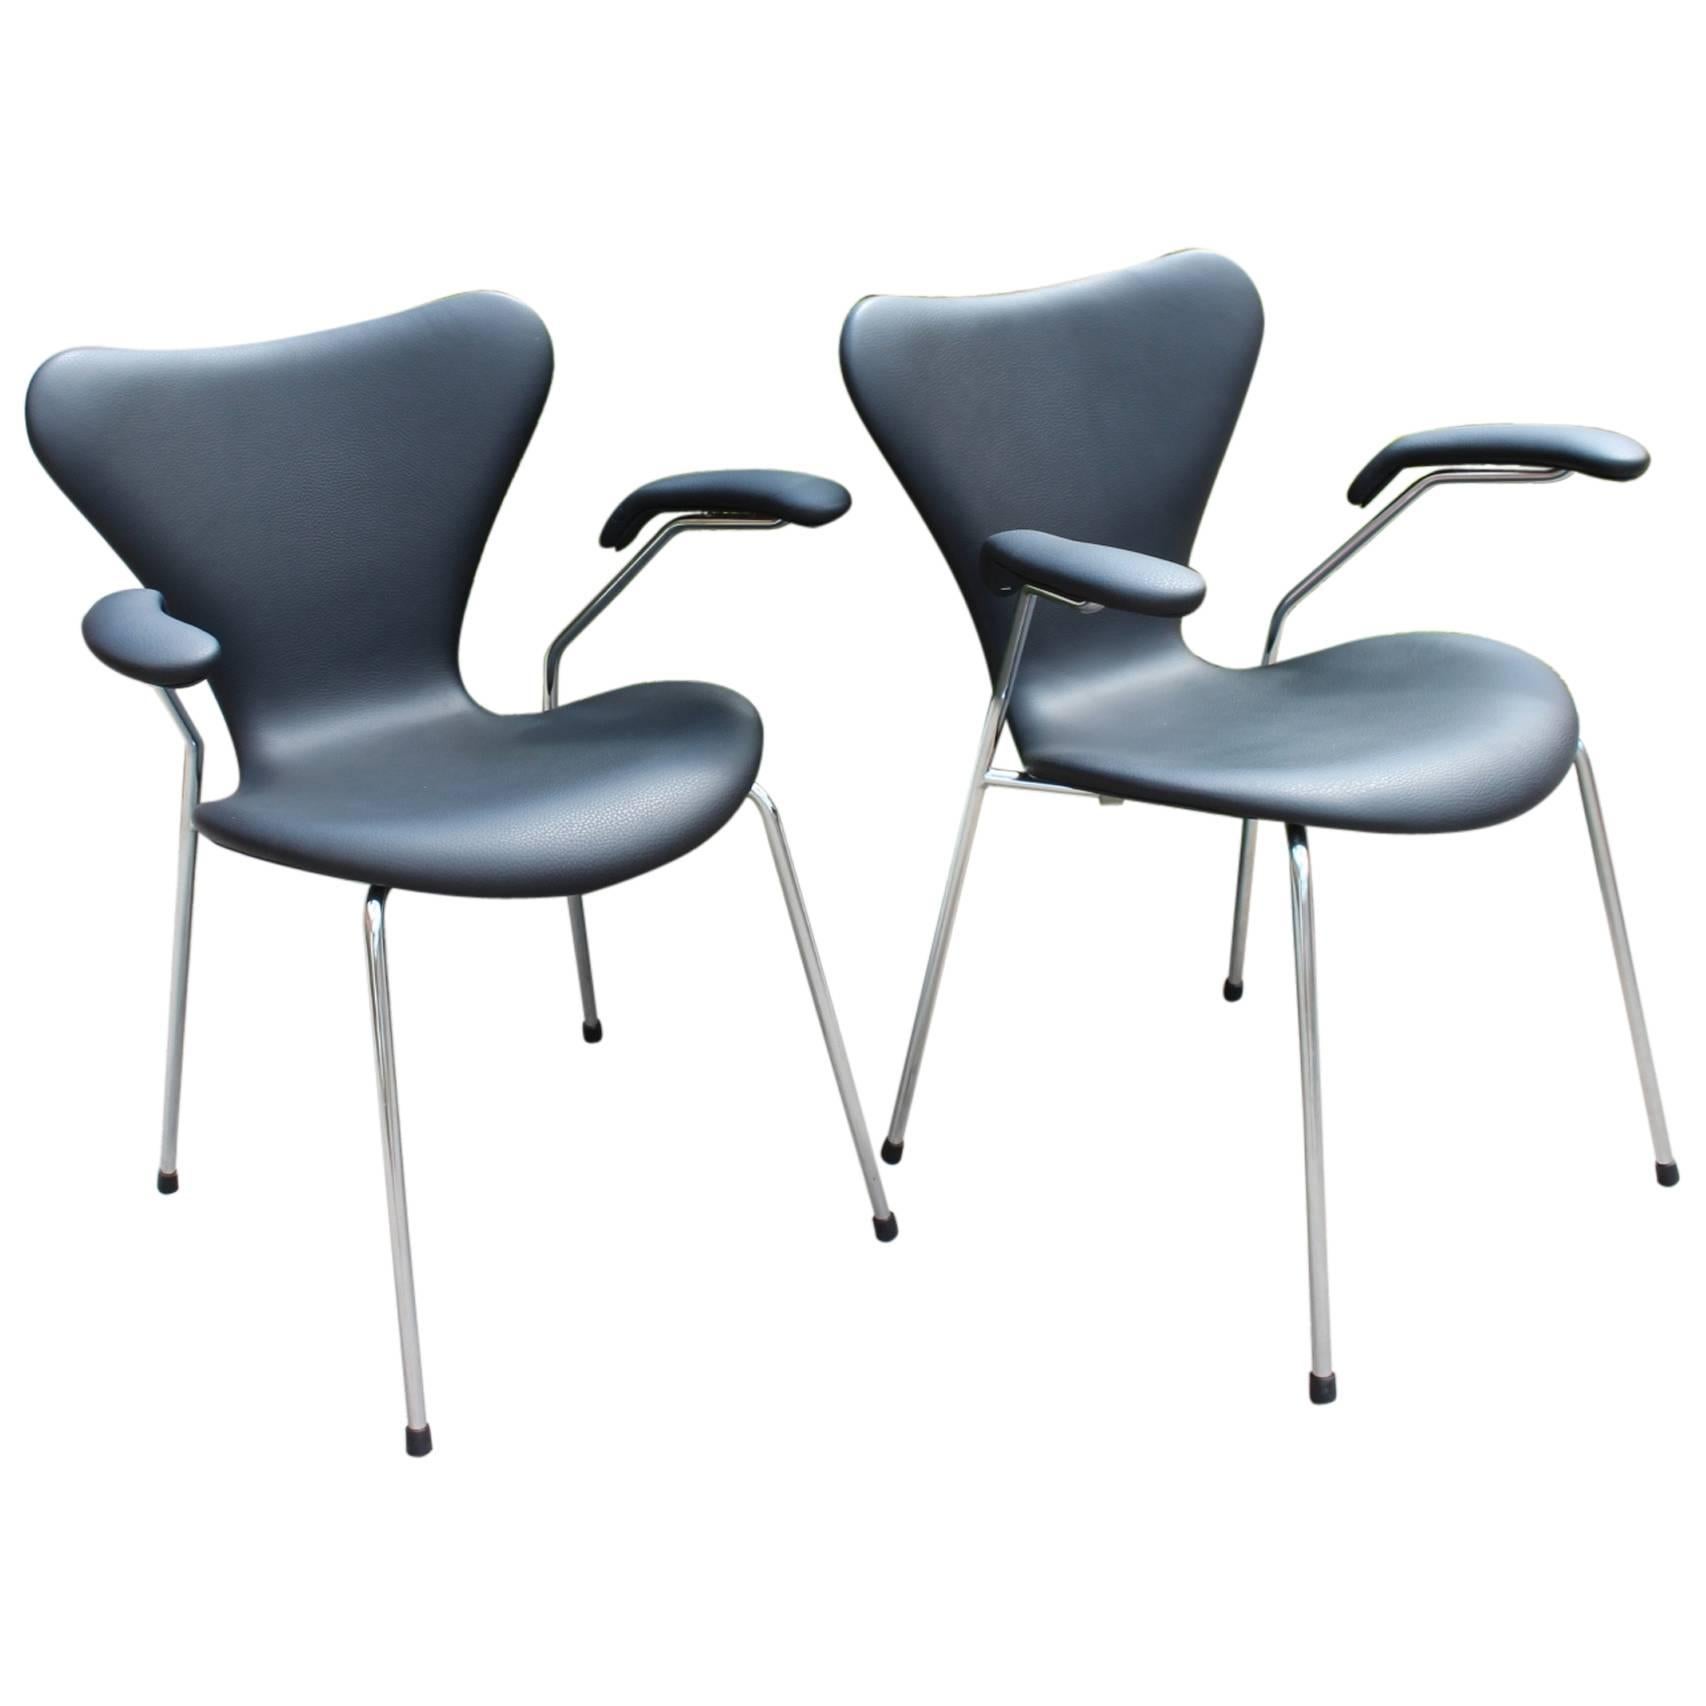 Series 7 Chairs, Model 3207 with Armrests by Arne Jacobsen and Fritz Hansen